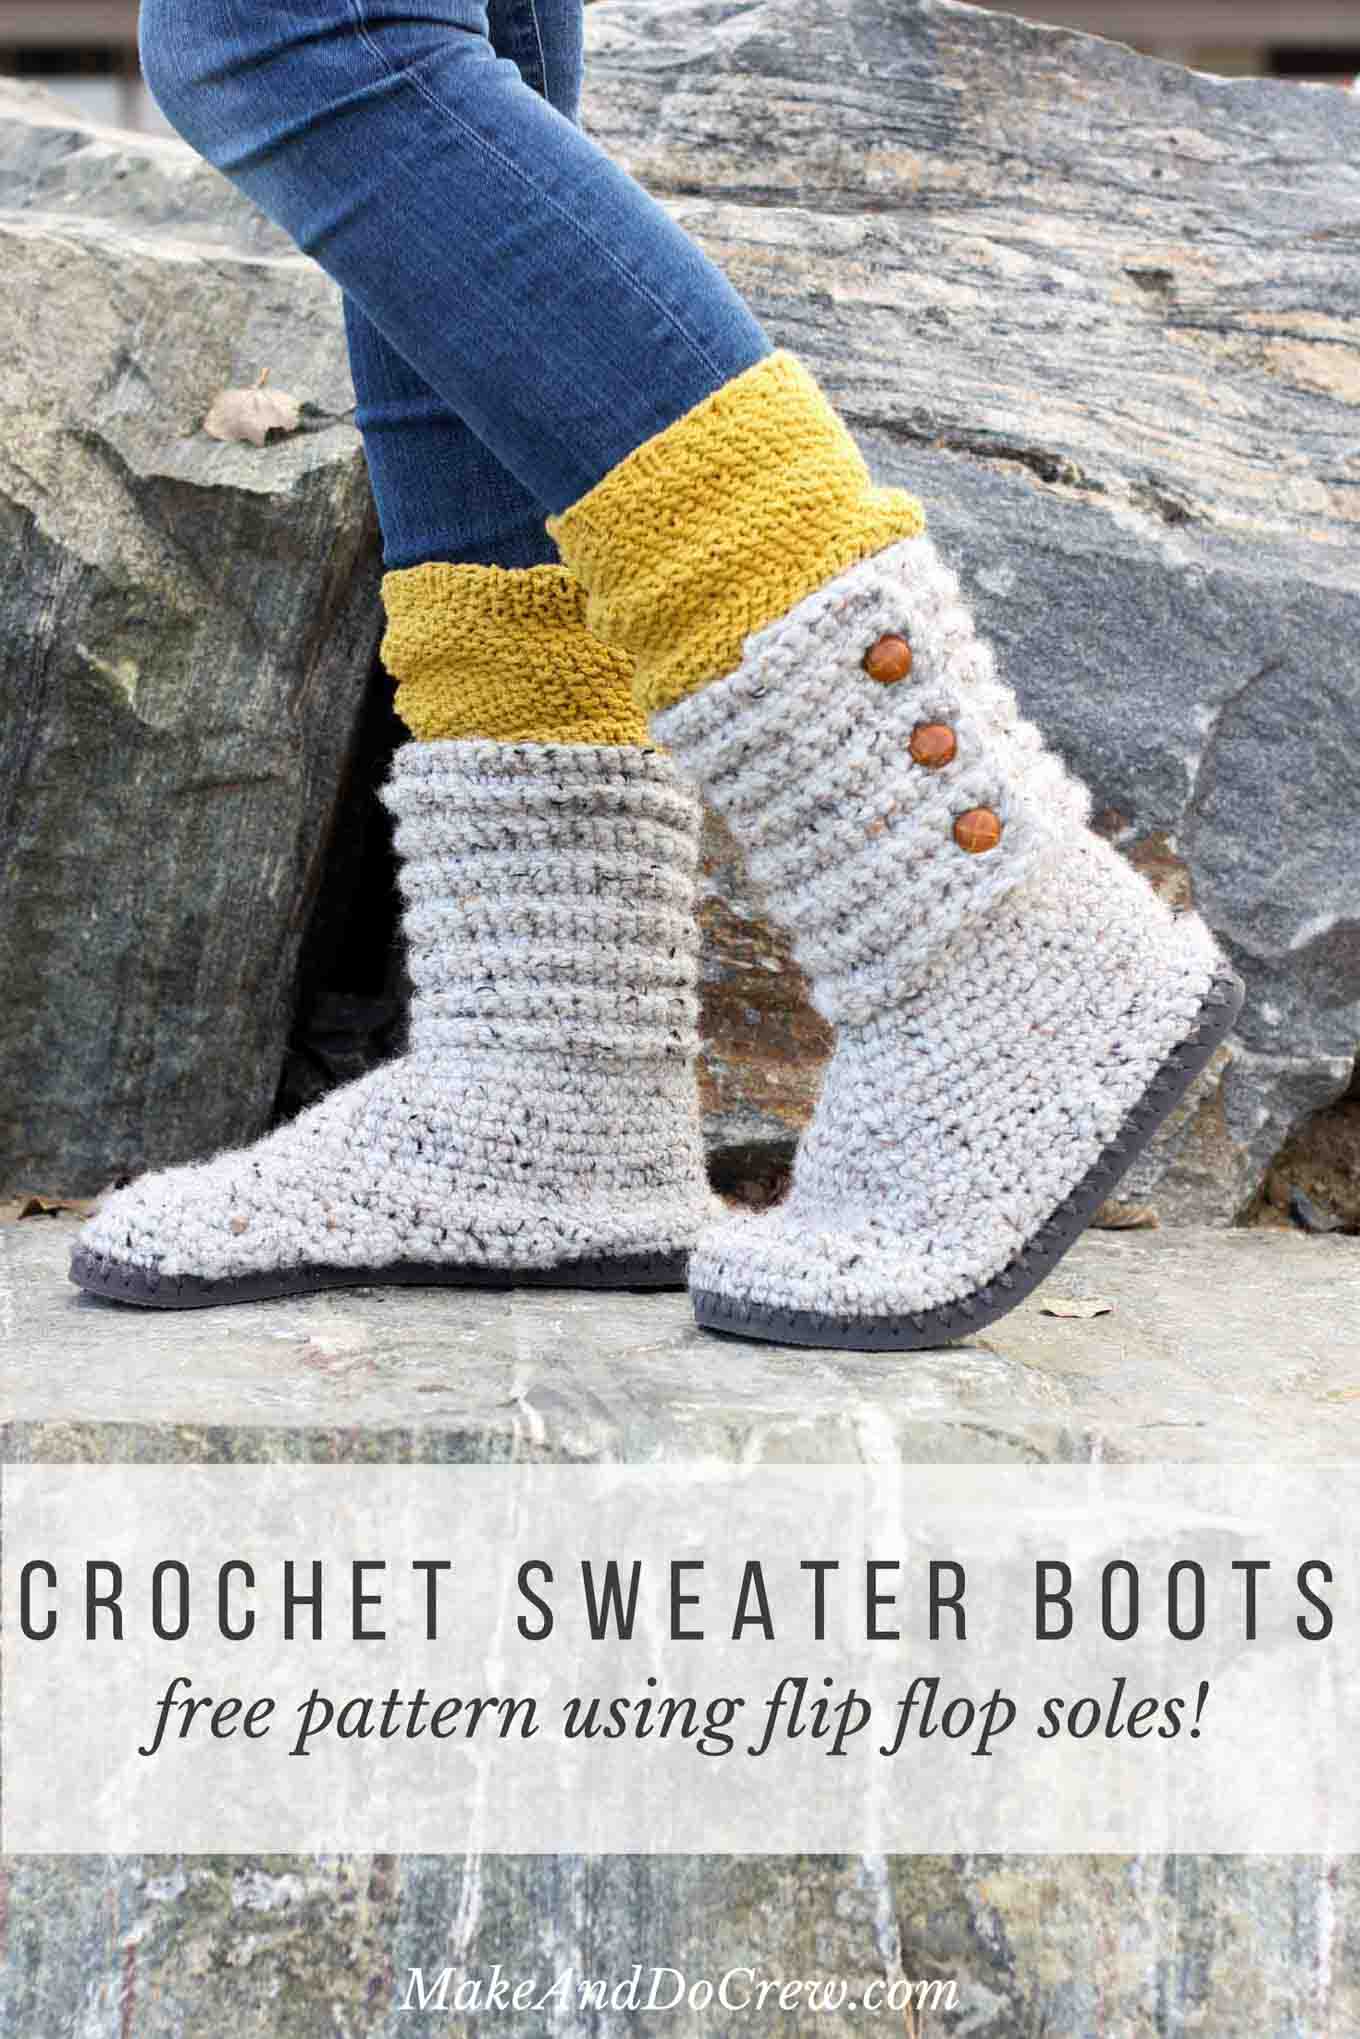 With this free pattern and crochet video tutorial you can make your own look-a-like crochet Uggs! These crochet boots with flip flops for soles make great outdoor shoes or house slippers. Made with Lion Brand Wool Ease Thick and Quick in Grey Marble.